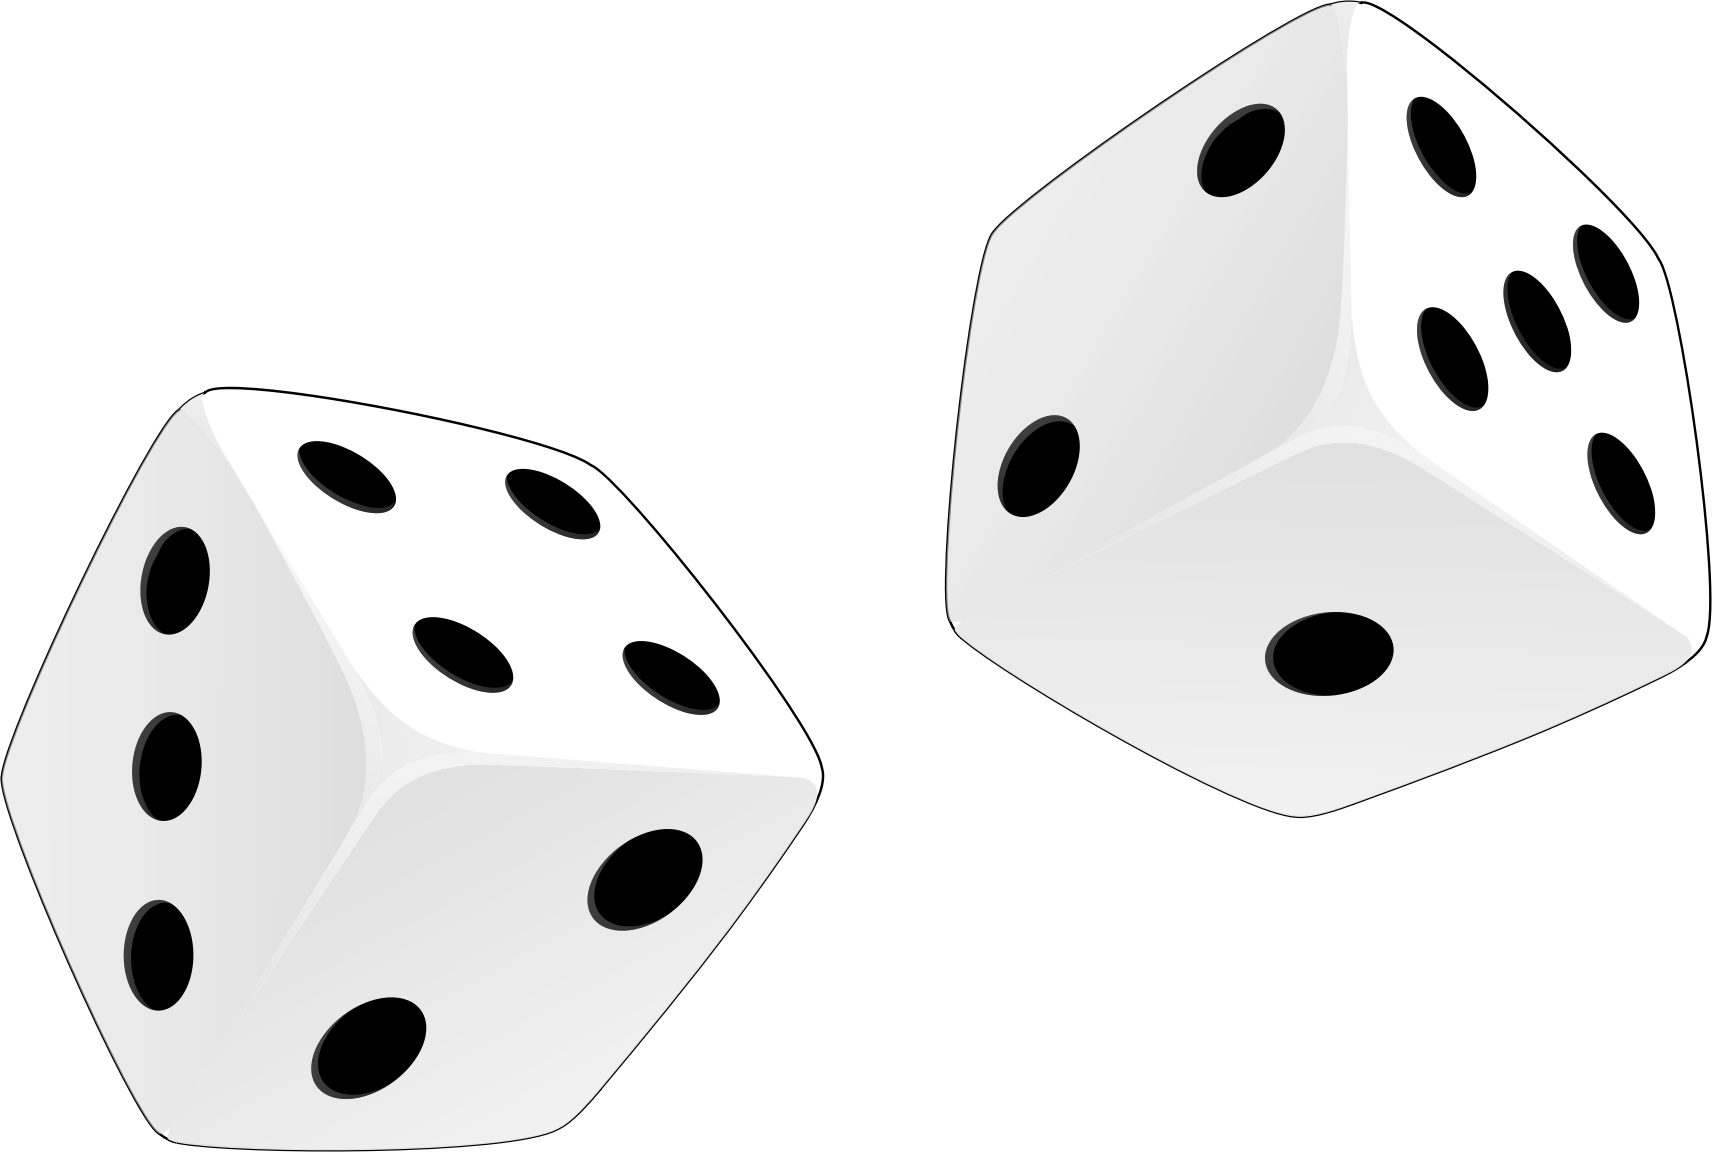 Dice Png Images Free Download Dice Icon And Cliparts Free Transparent Png Logos